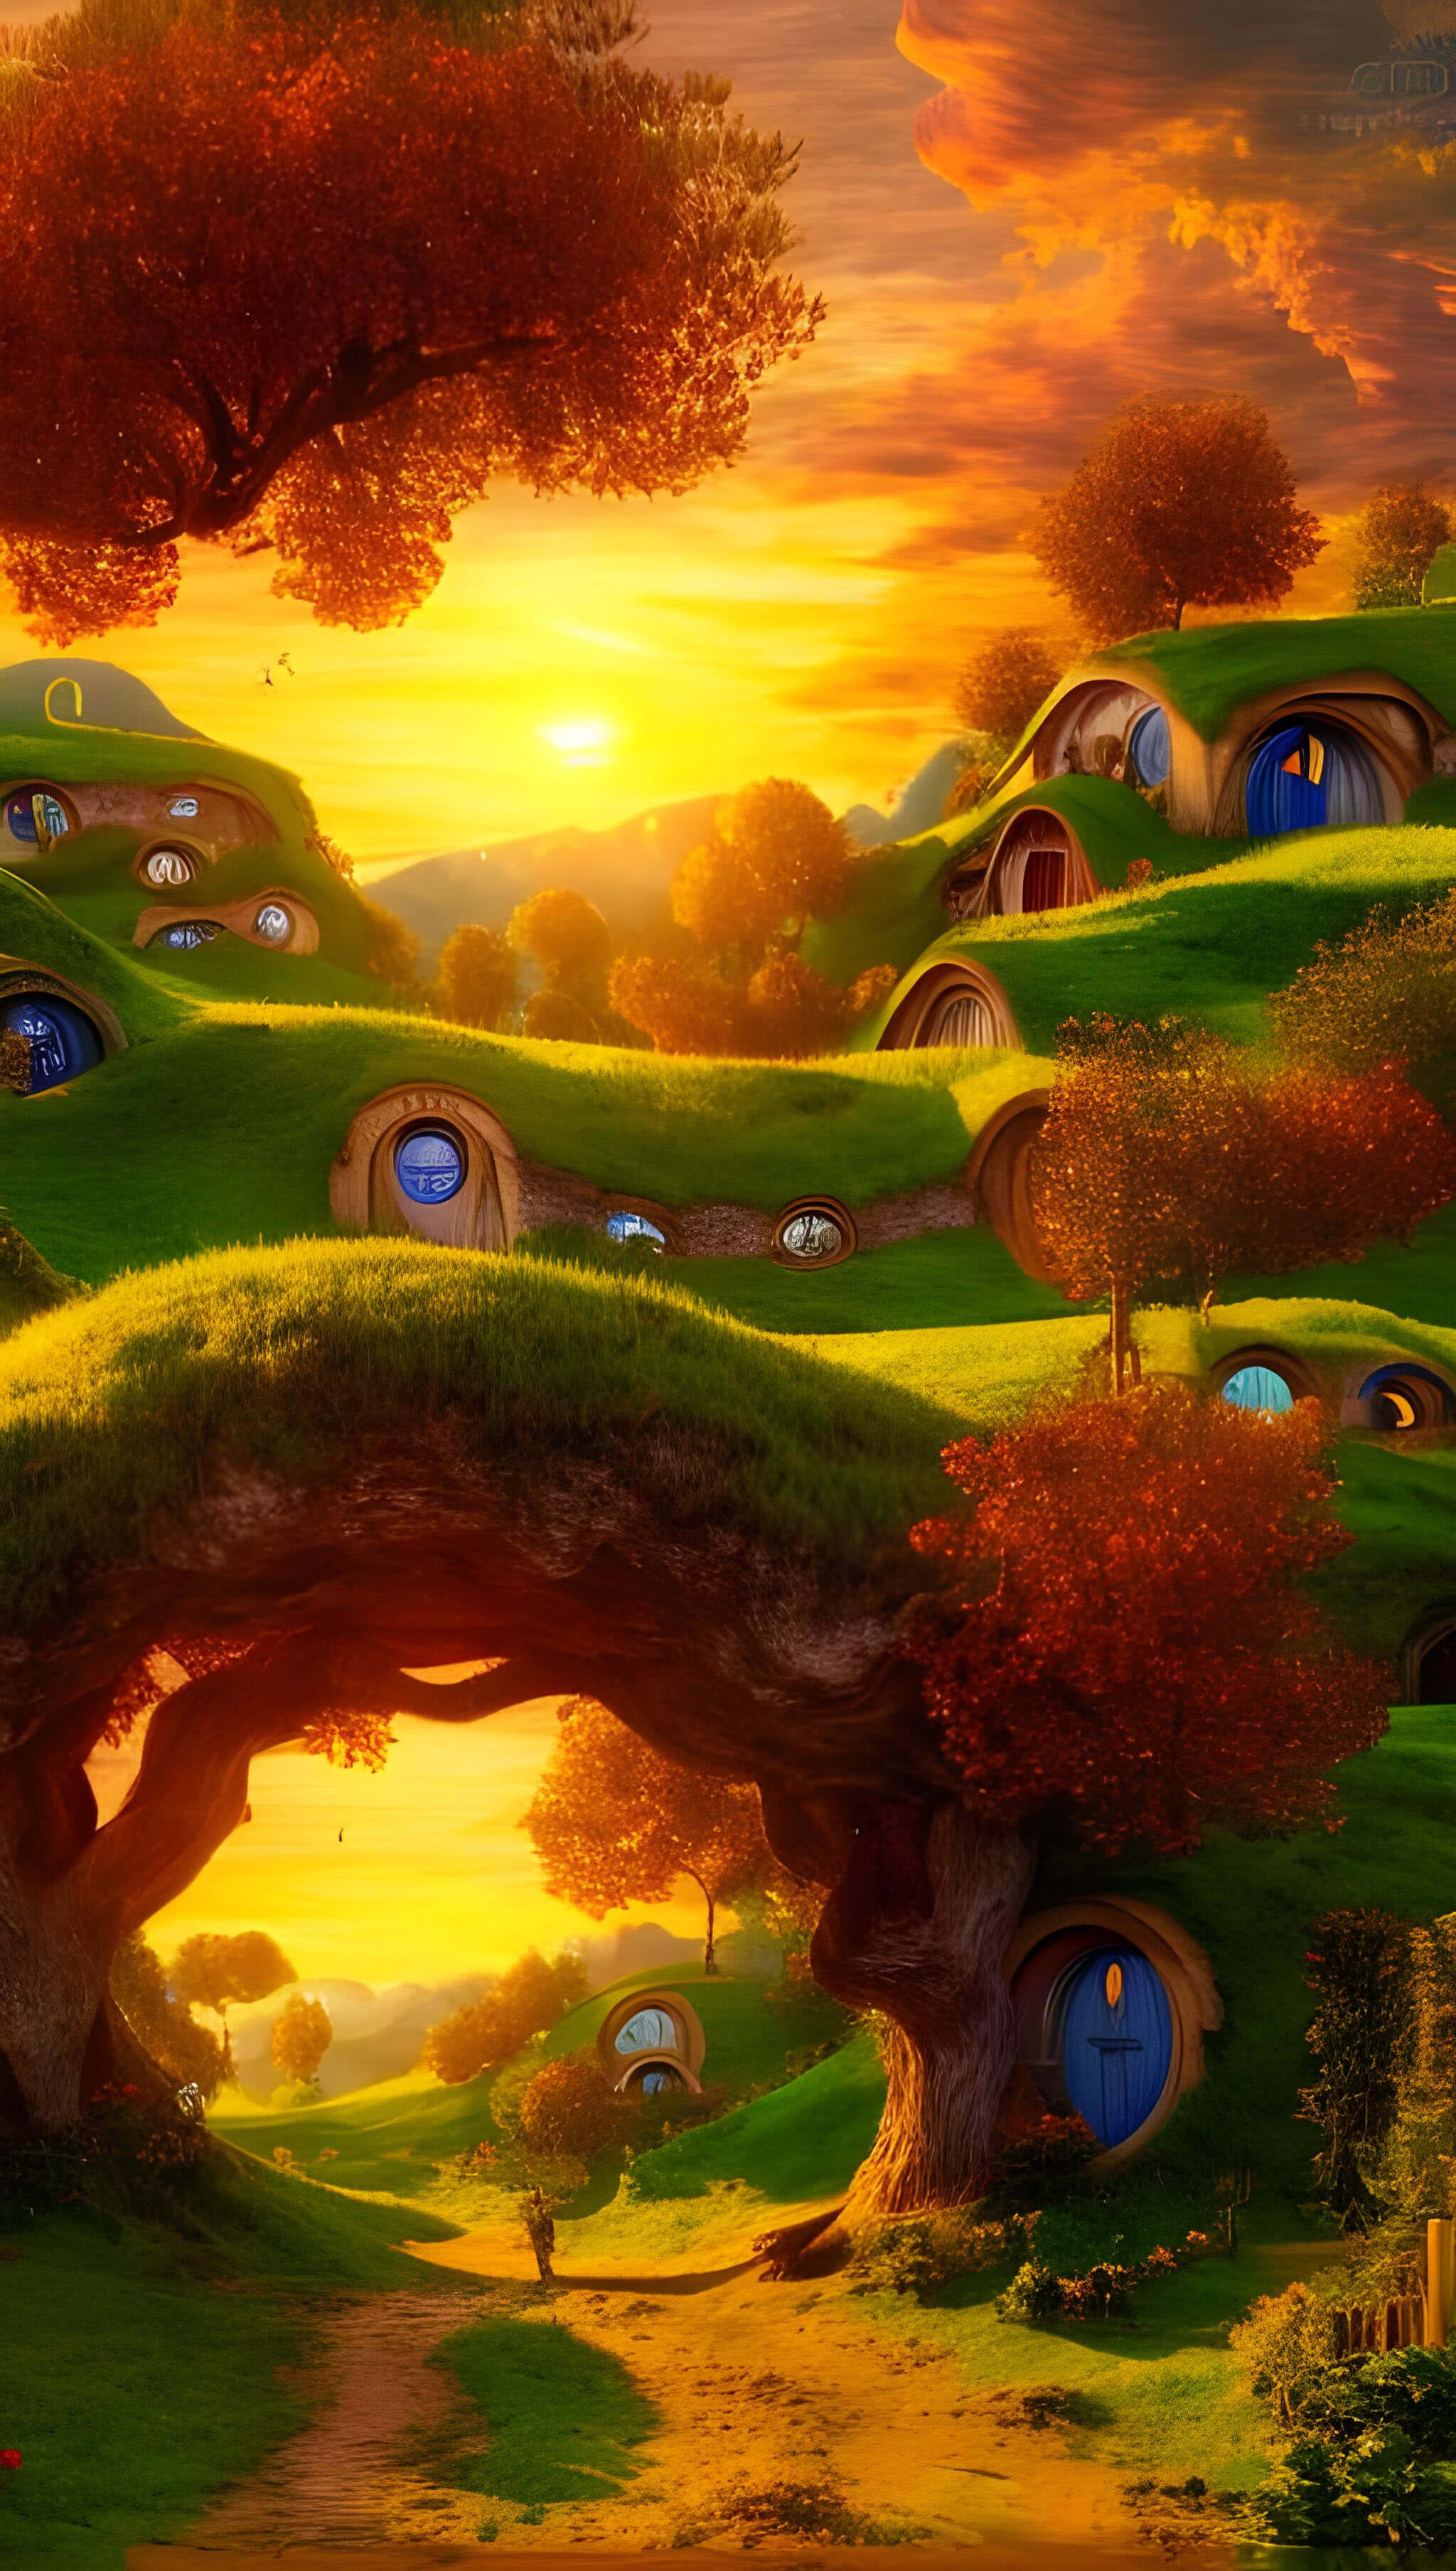 A painting of hobbit houses in the forest - 3D